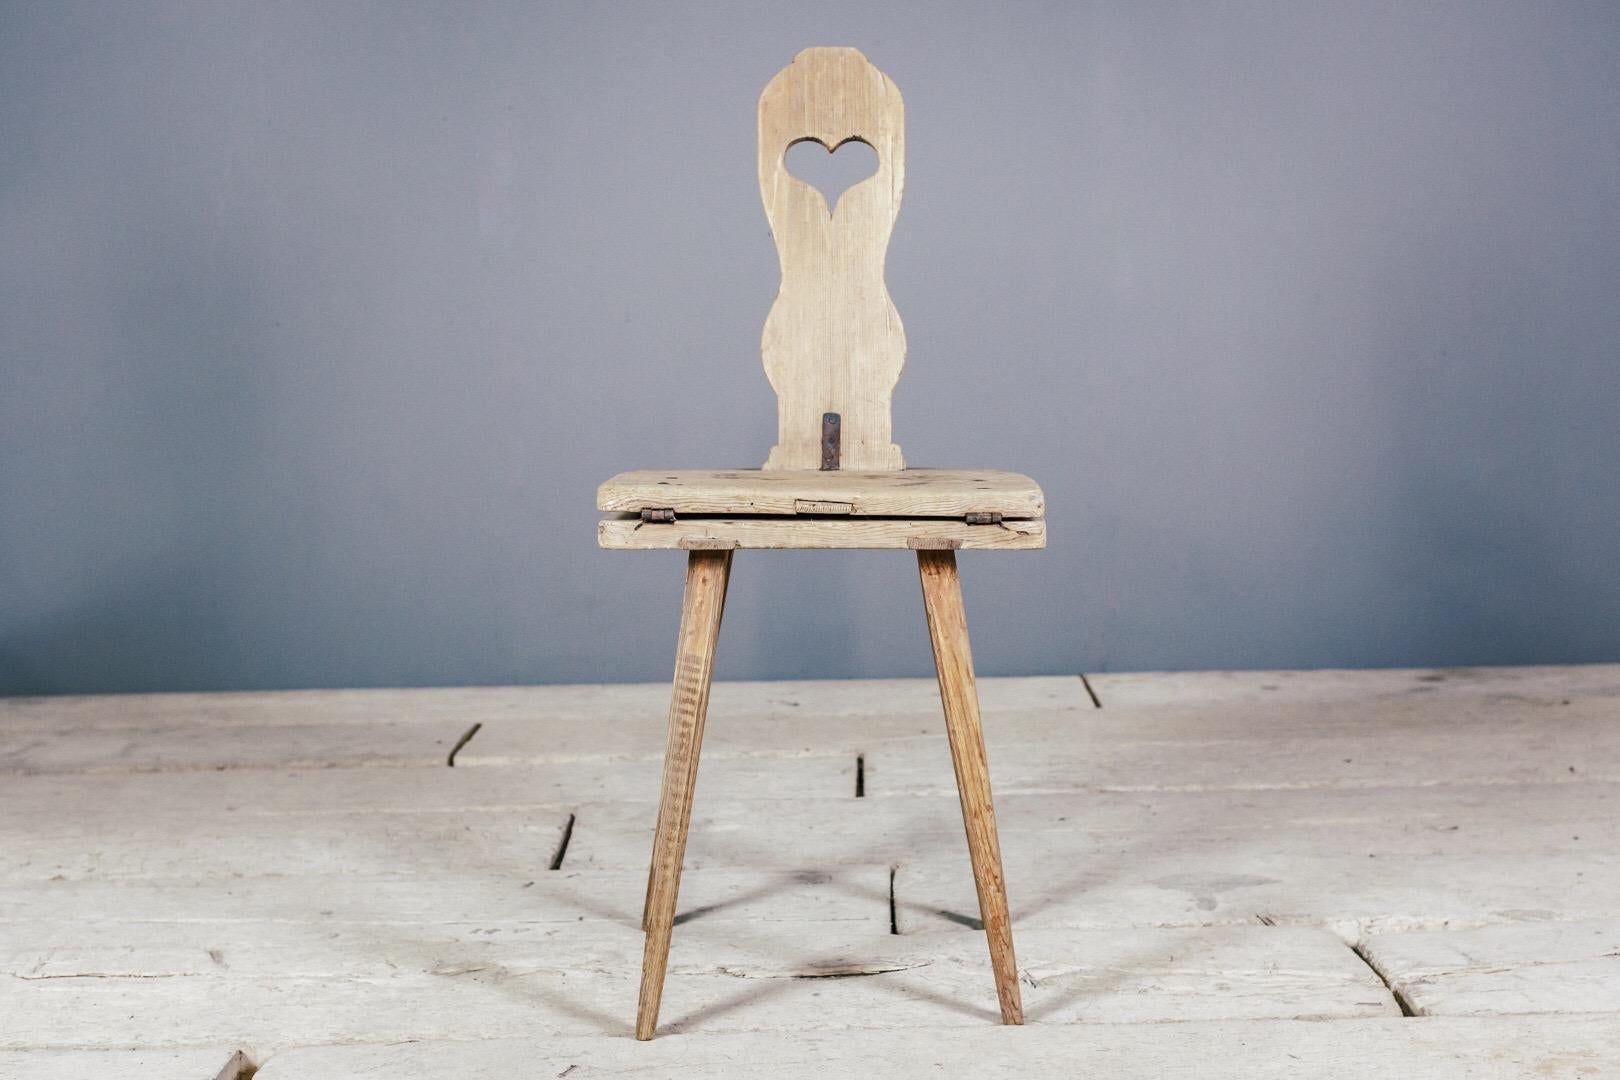 Primitive love token metamorphic chair table or Bordstol, naive love heart carved into the back splat. Unusually delicate and refined tapered legs.
Measurement as a table 56cm High, 87cm wide, 48cm deep.
Dimensions: 48cm x 110cm x 44cm.